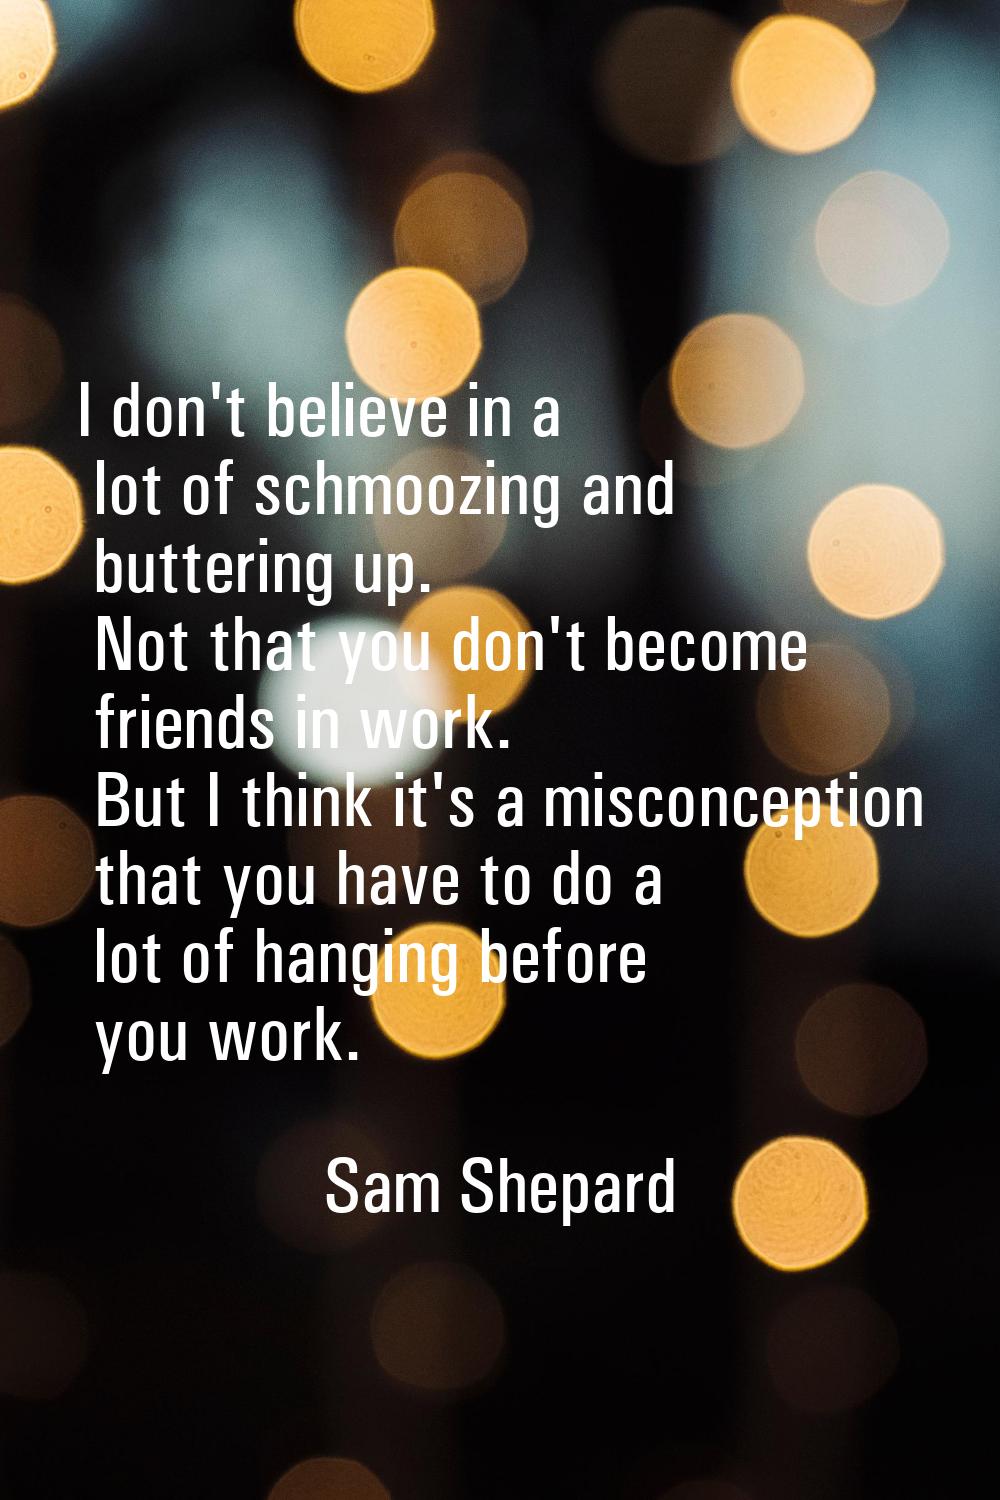 I don't believe in a lot of schmoozing and buttering up. Not that you don't become friends in work.